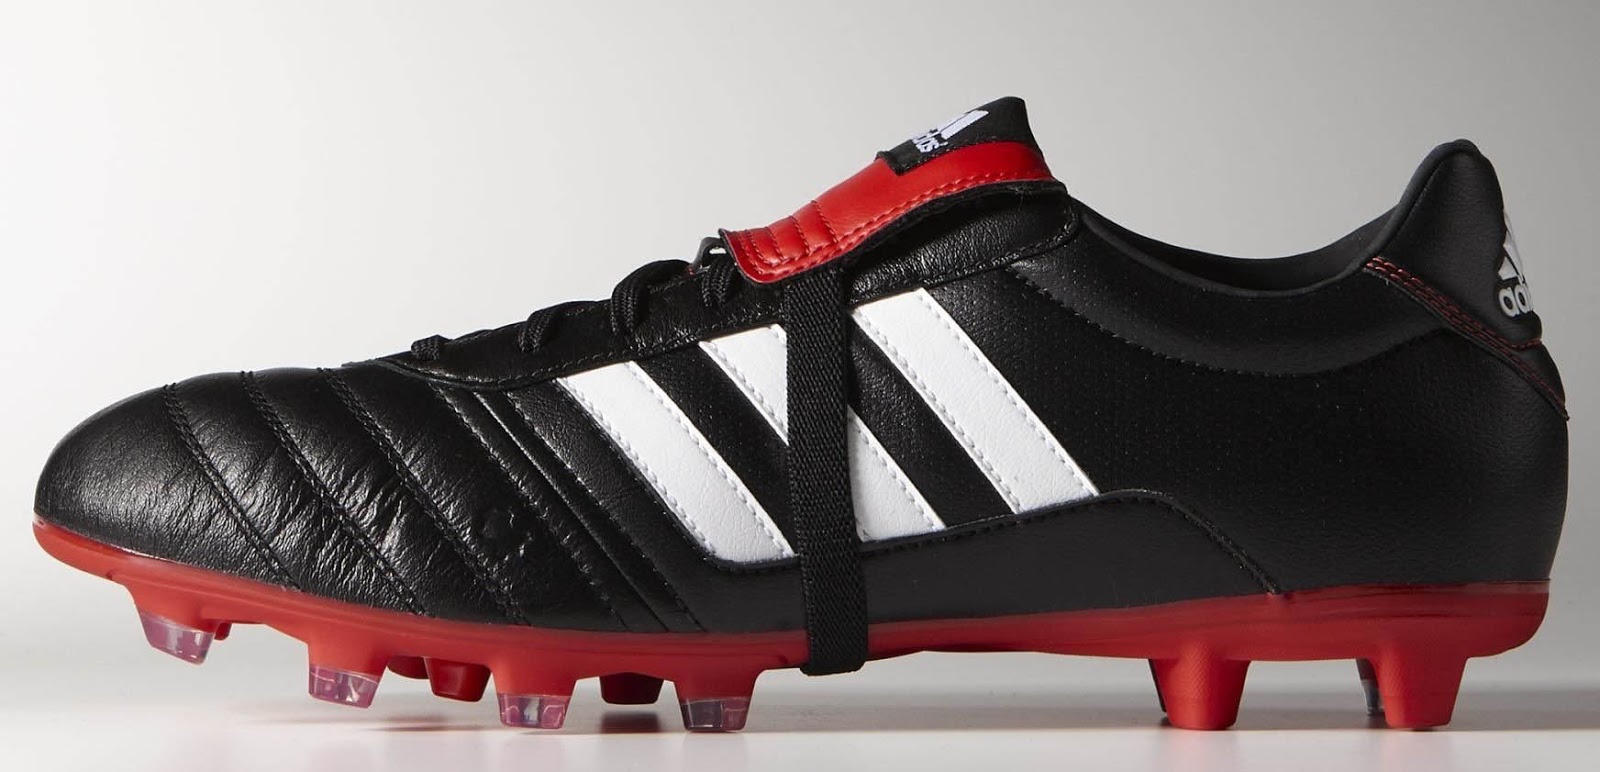 Black / Red Adidas Boots Revealed - Footy